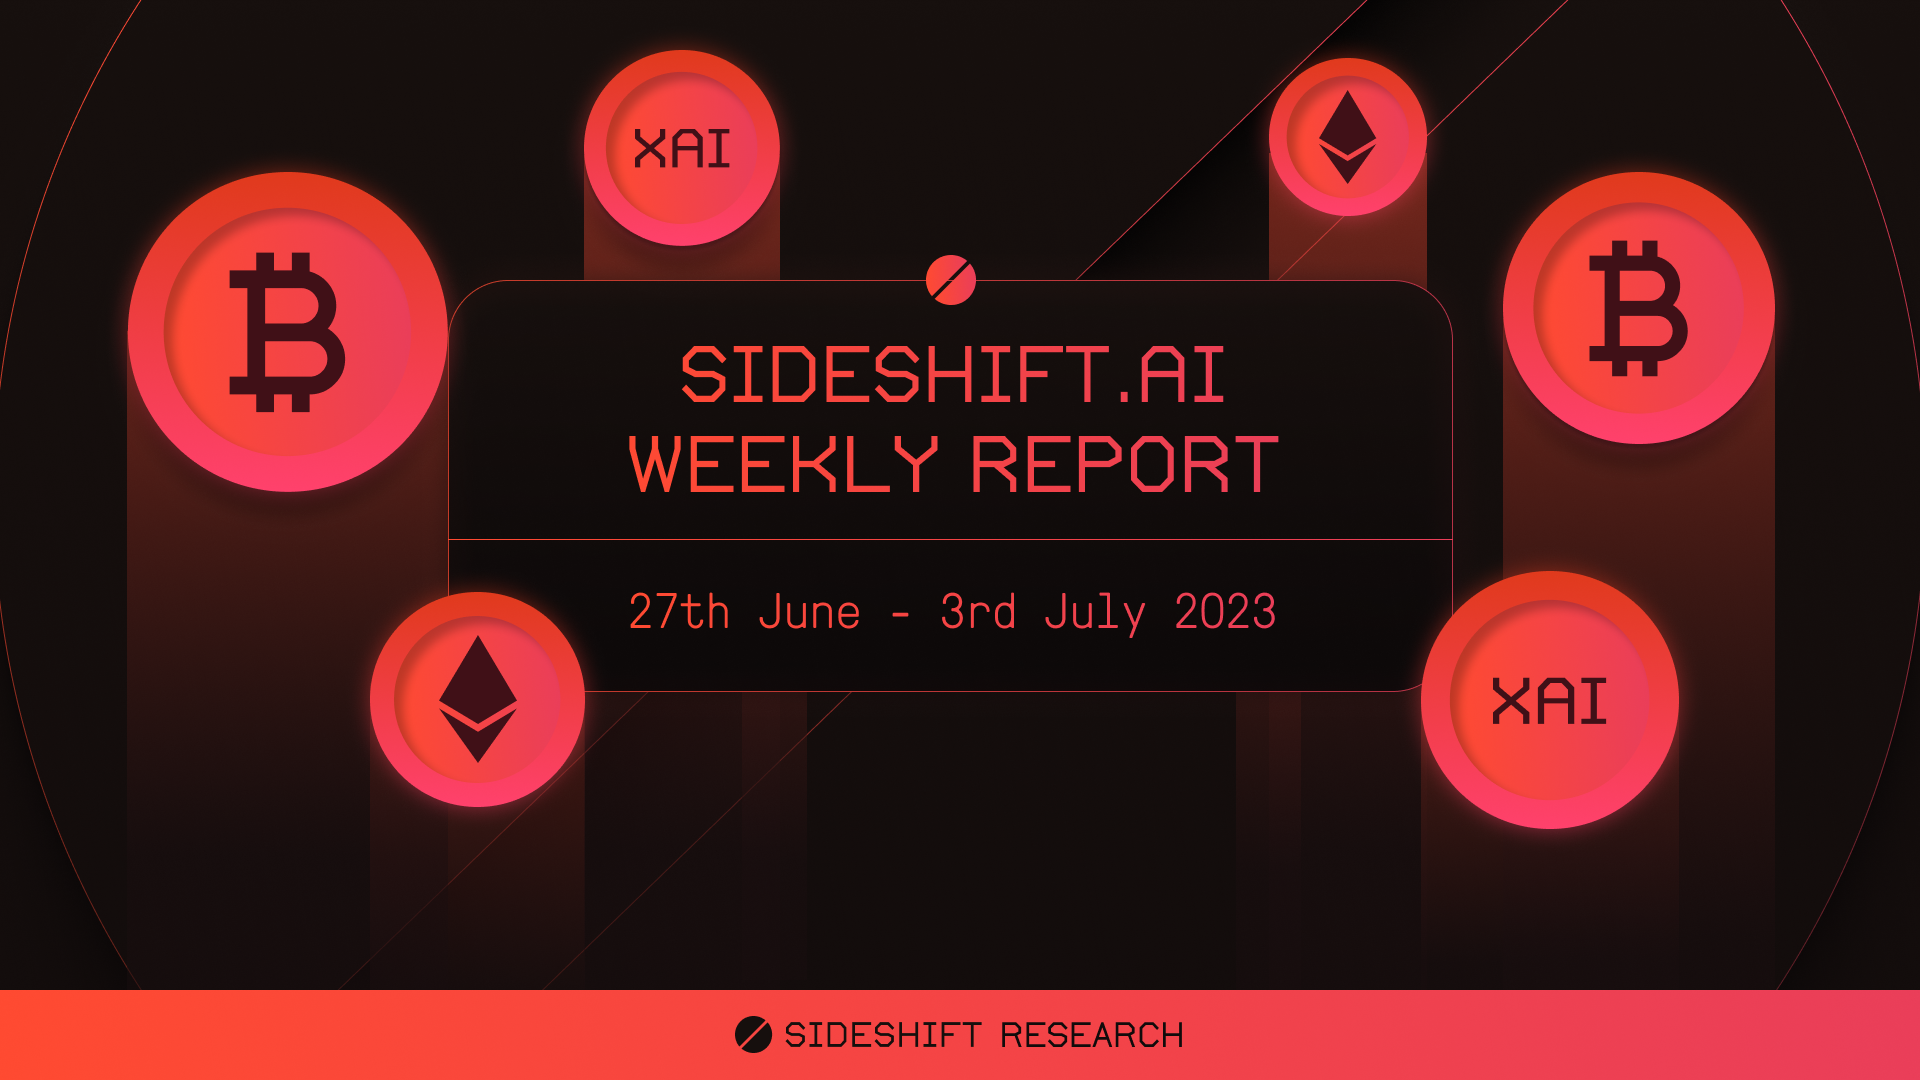 SideShift.ai Weekly Report | 27th June - 3rd July 2023